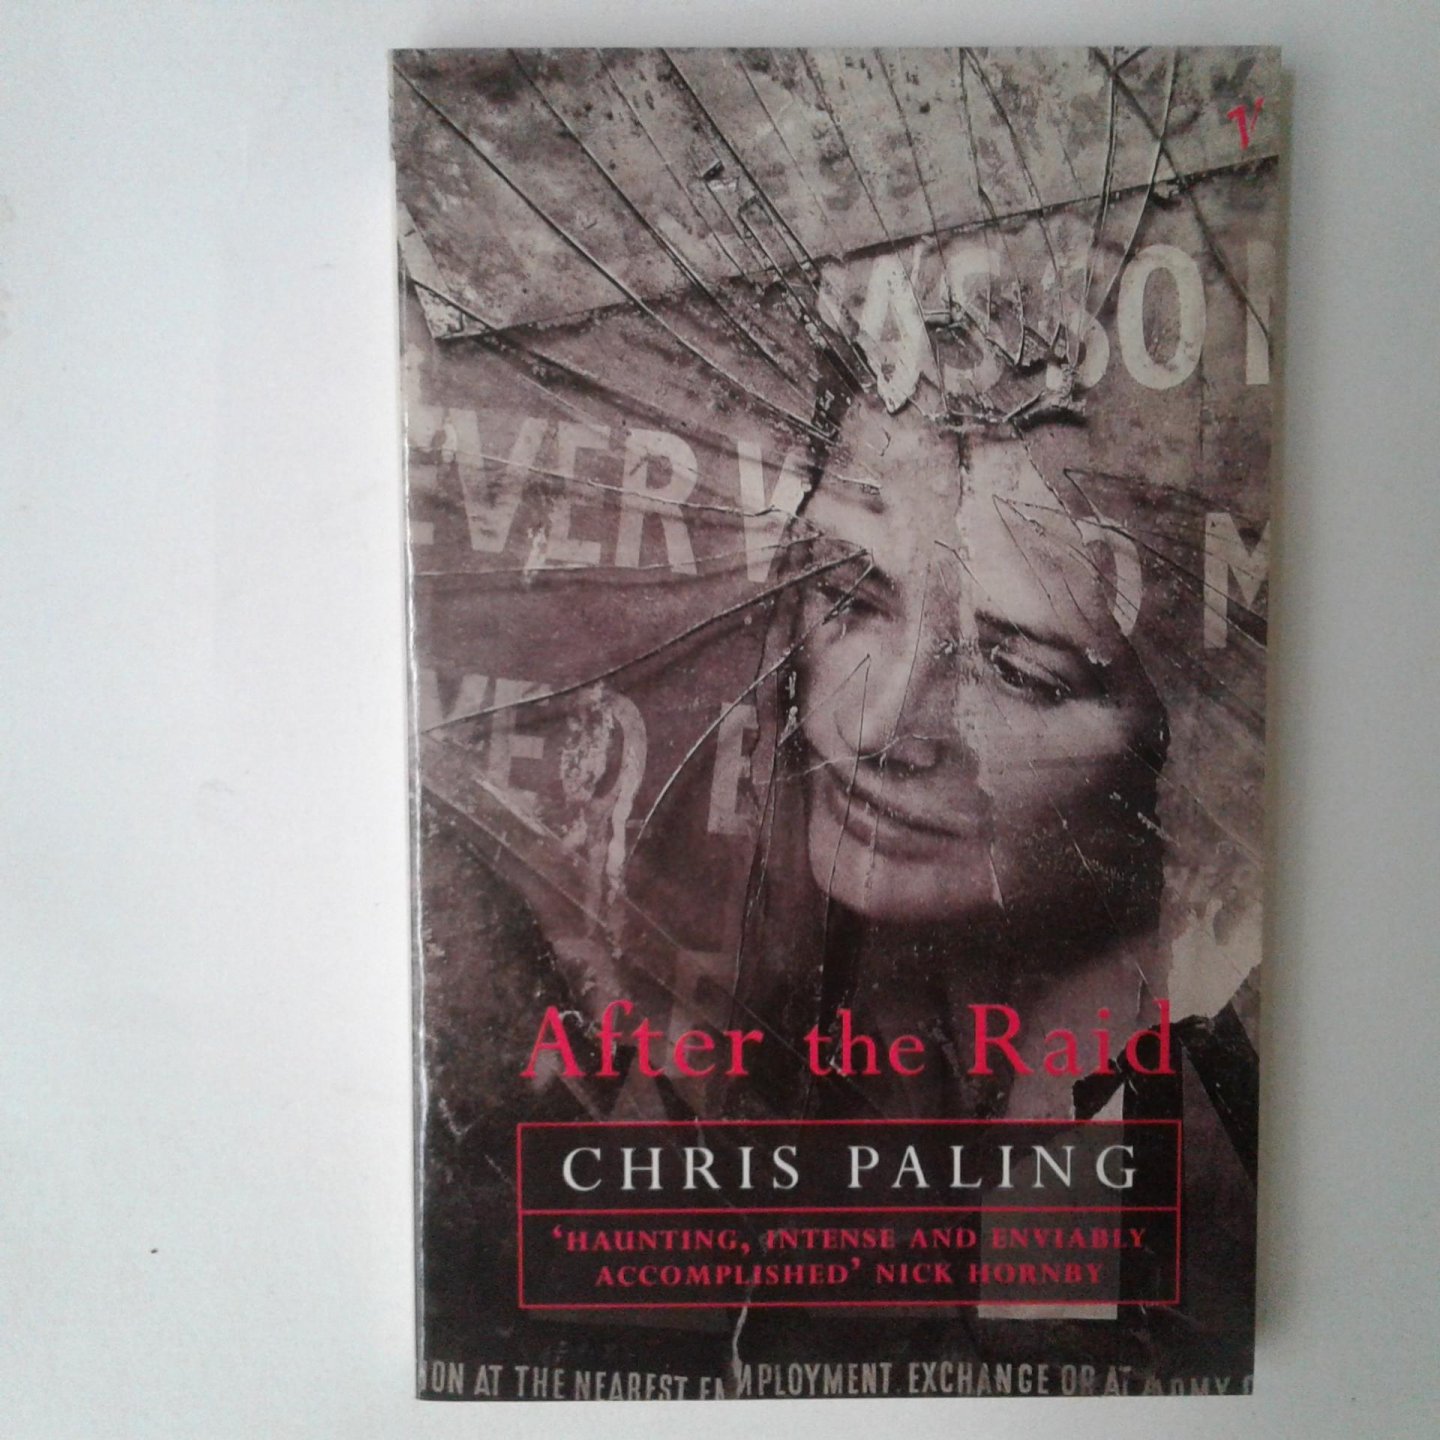 Paling, Chris - After the Raid